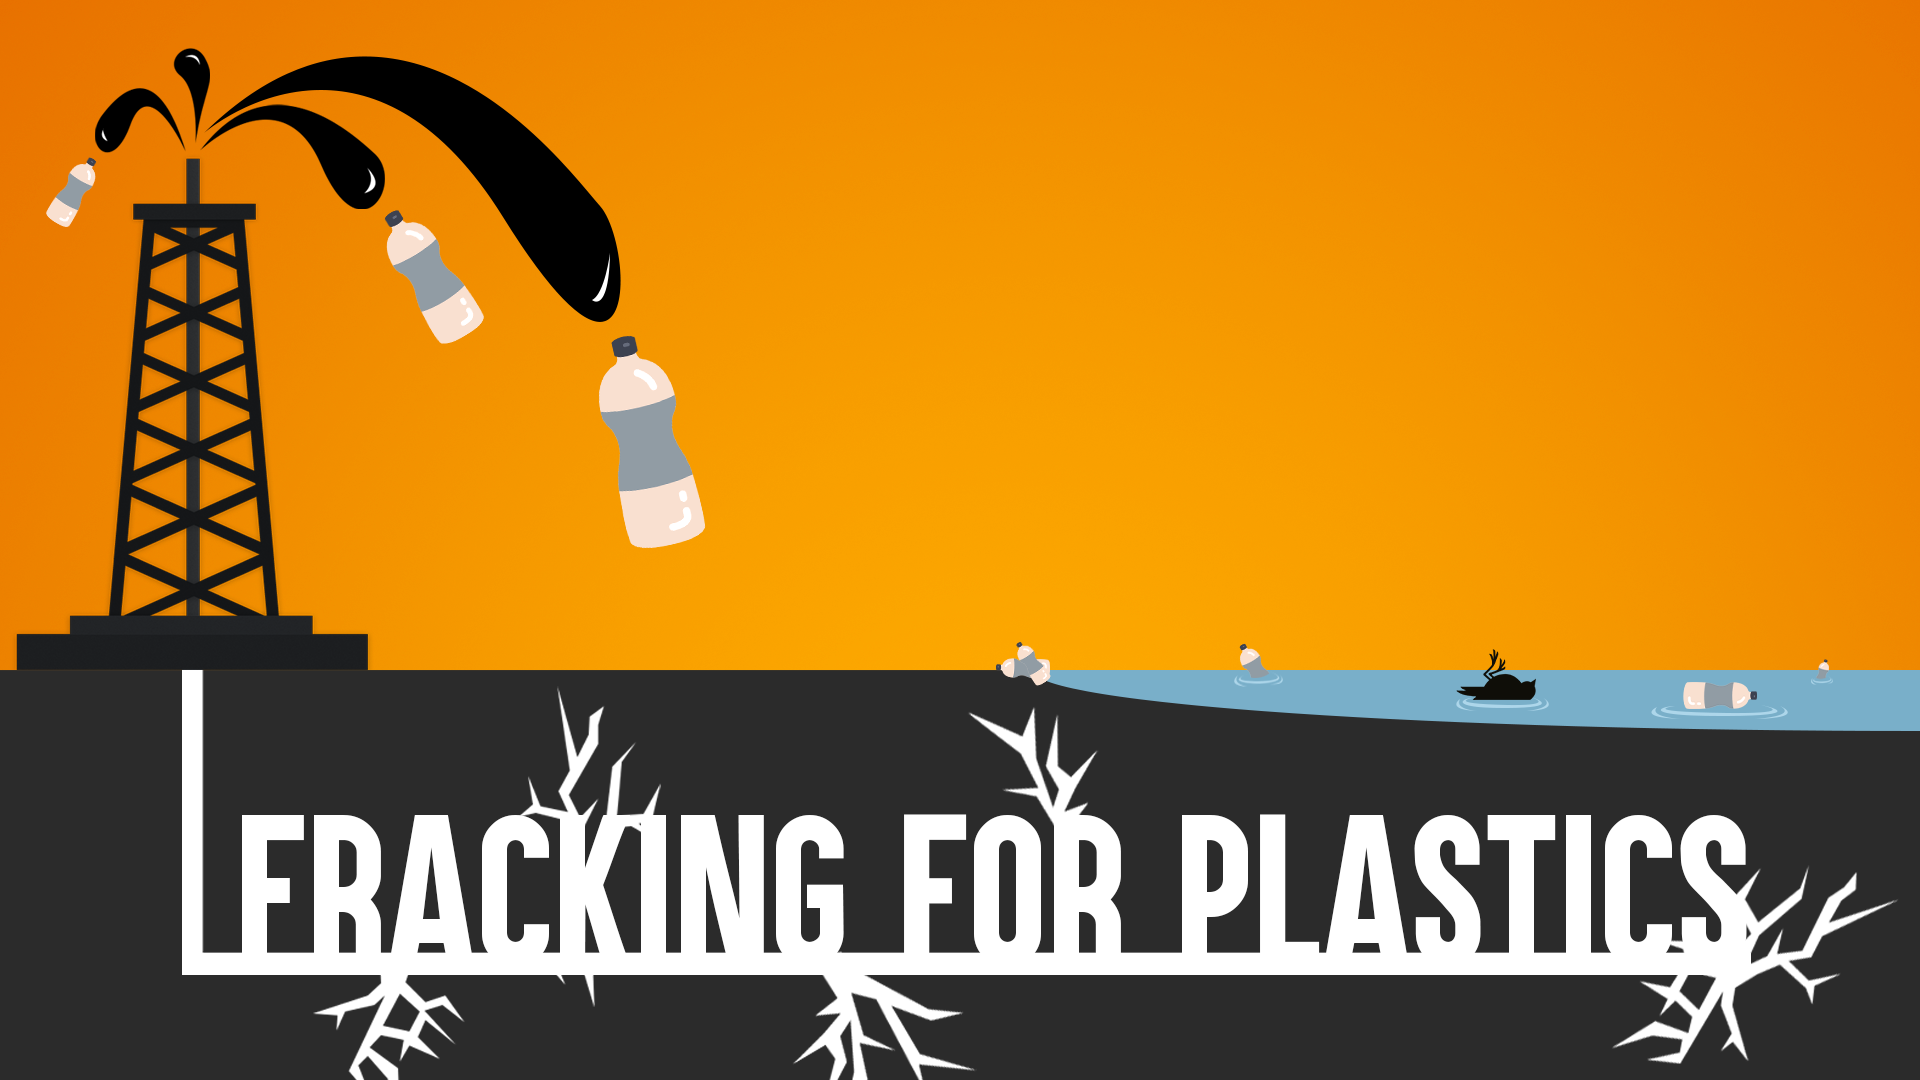 Fracking for Plastics graphic of plastic bottles spurting out of a fracked oil and gas well